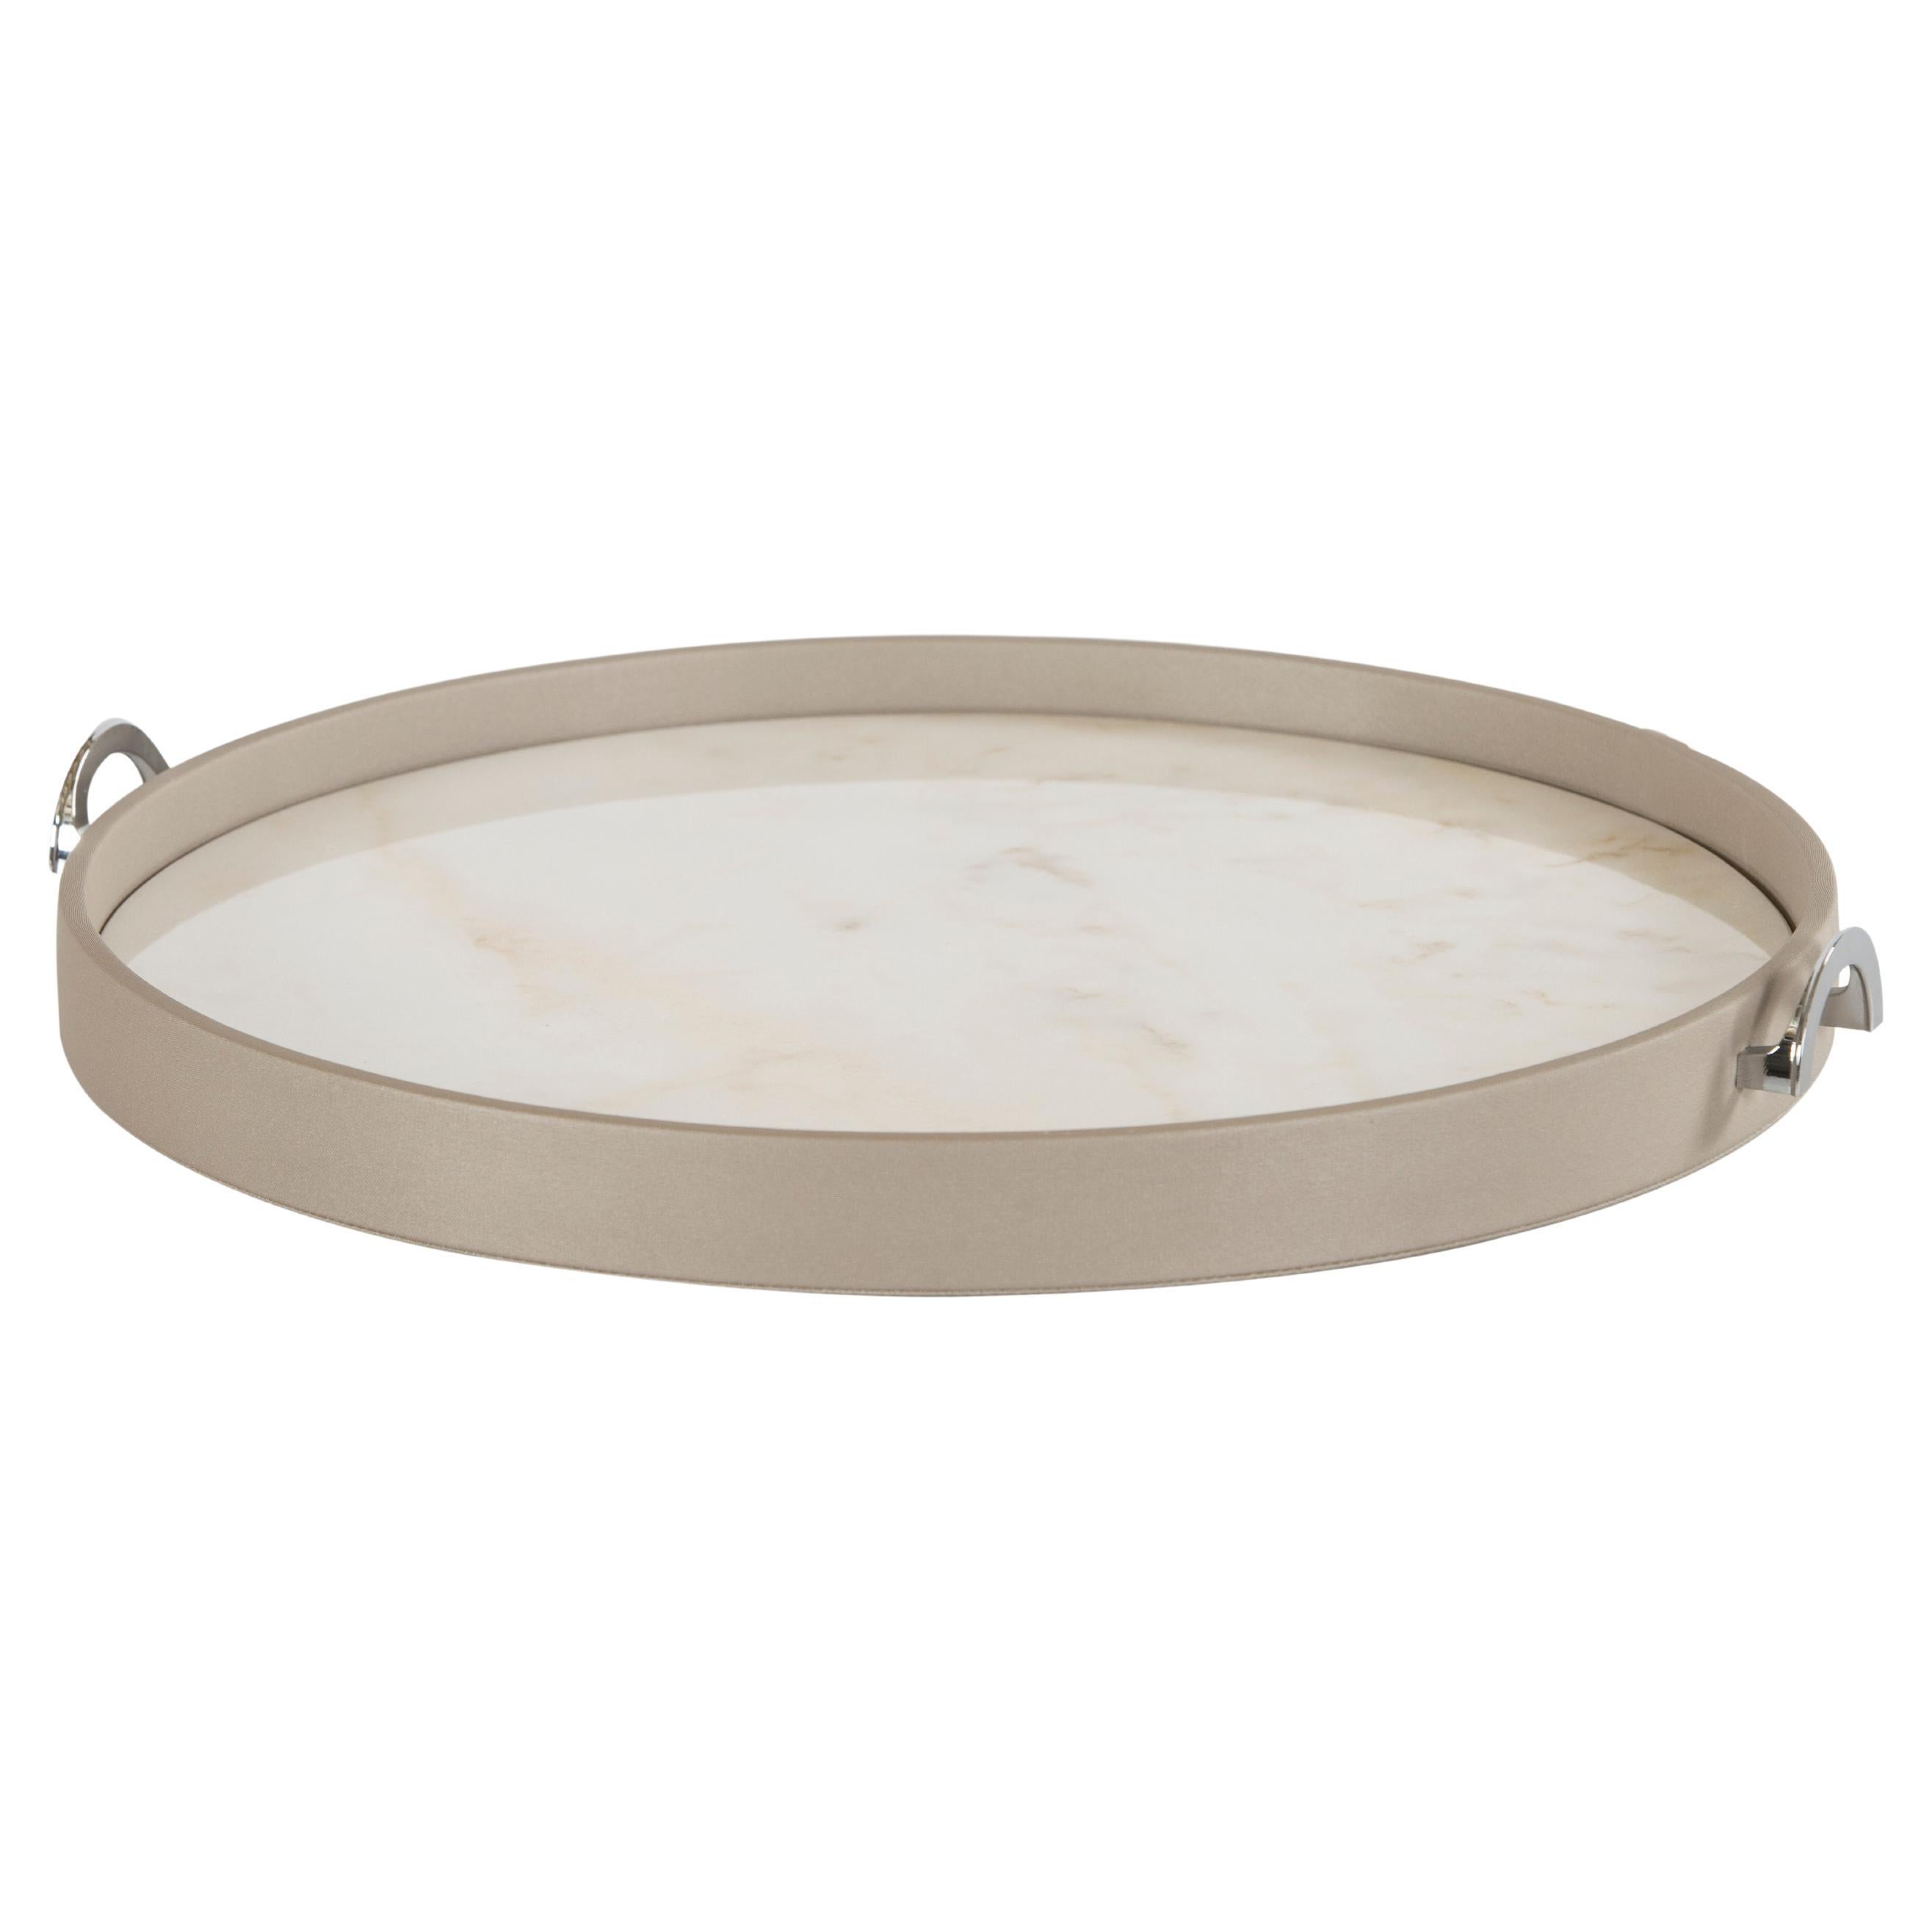 Serving Tray Alentejo, Calacatta Marble, Handmade in Portugal by Lusitanus Home